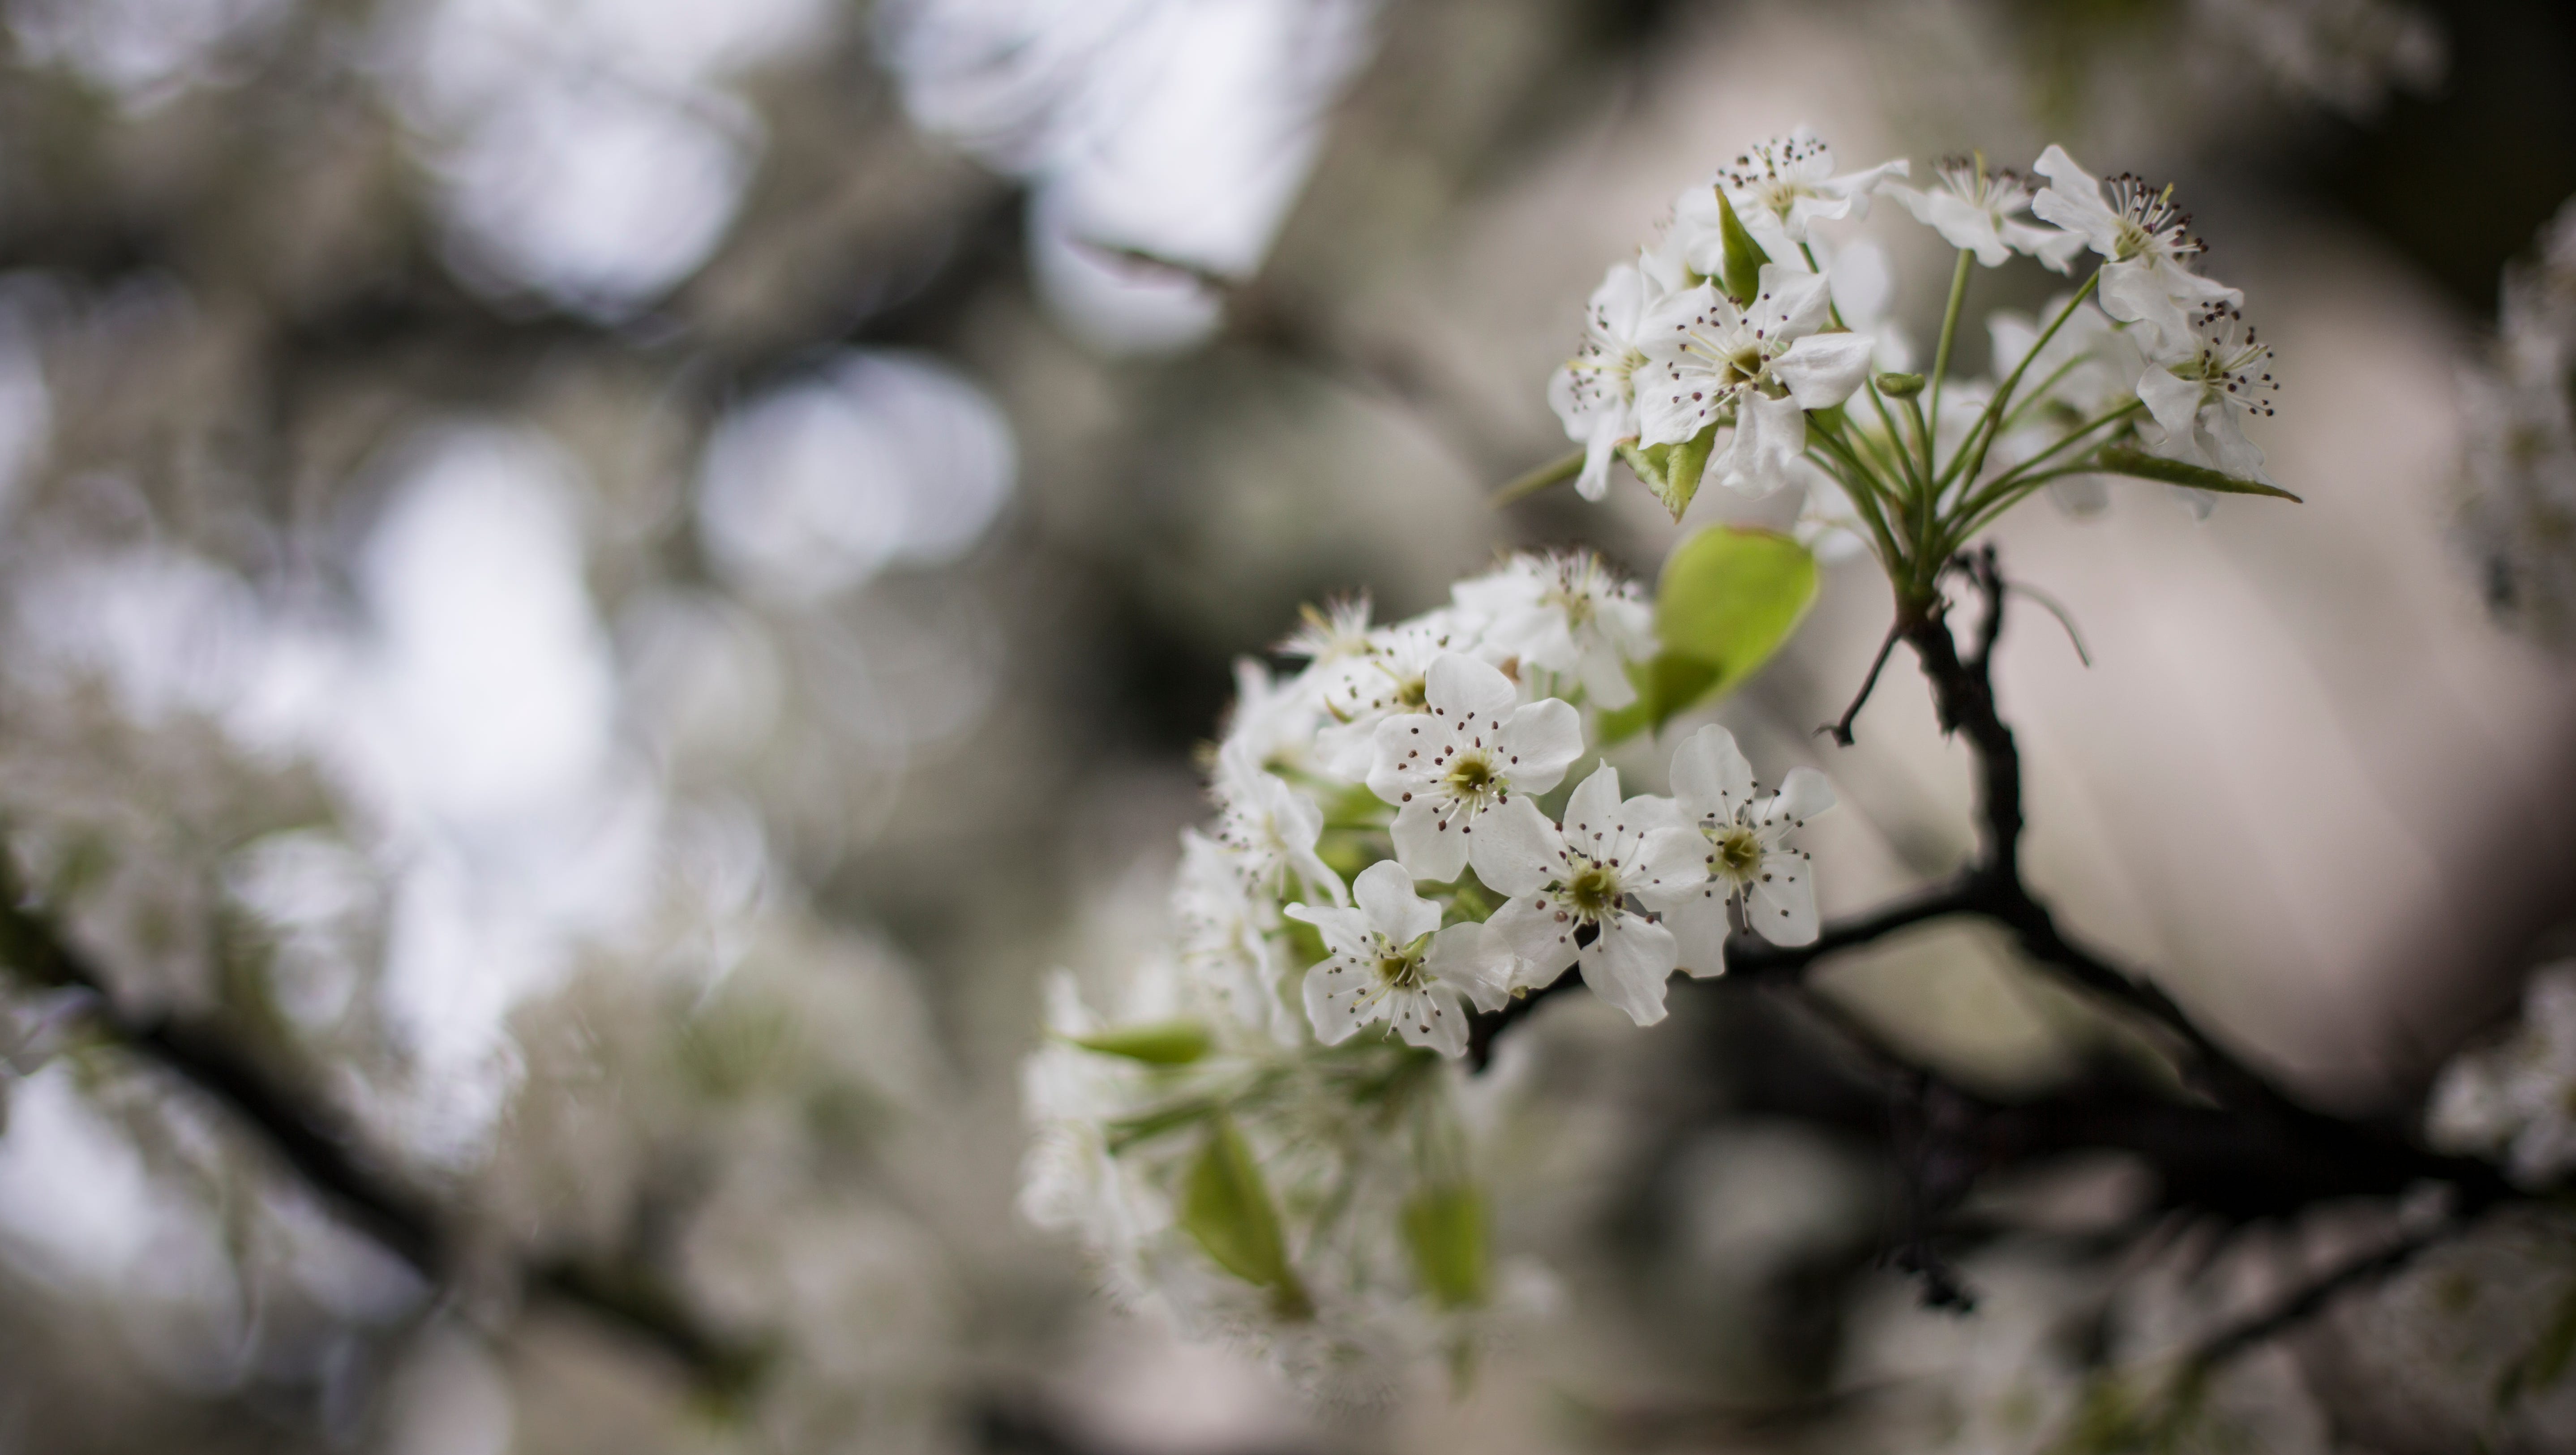 Bradford pears, the tree everyone loves to hate, means it's spring in Louisville